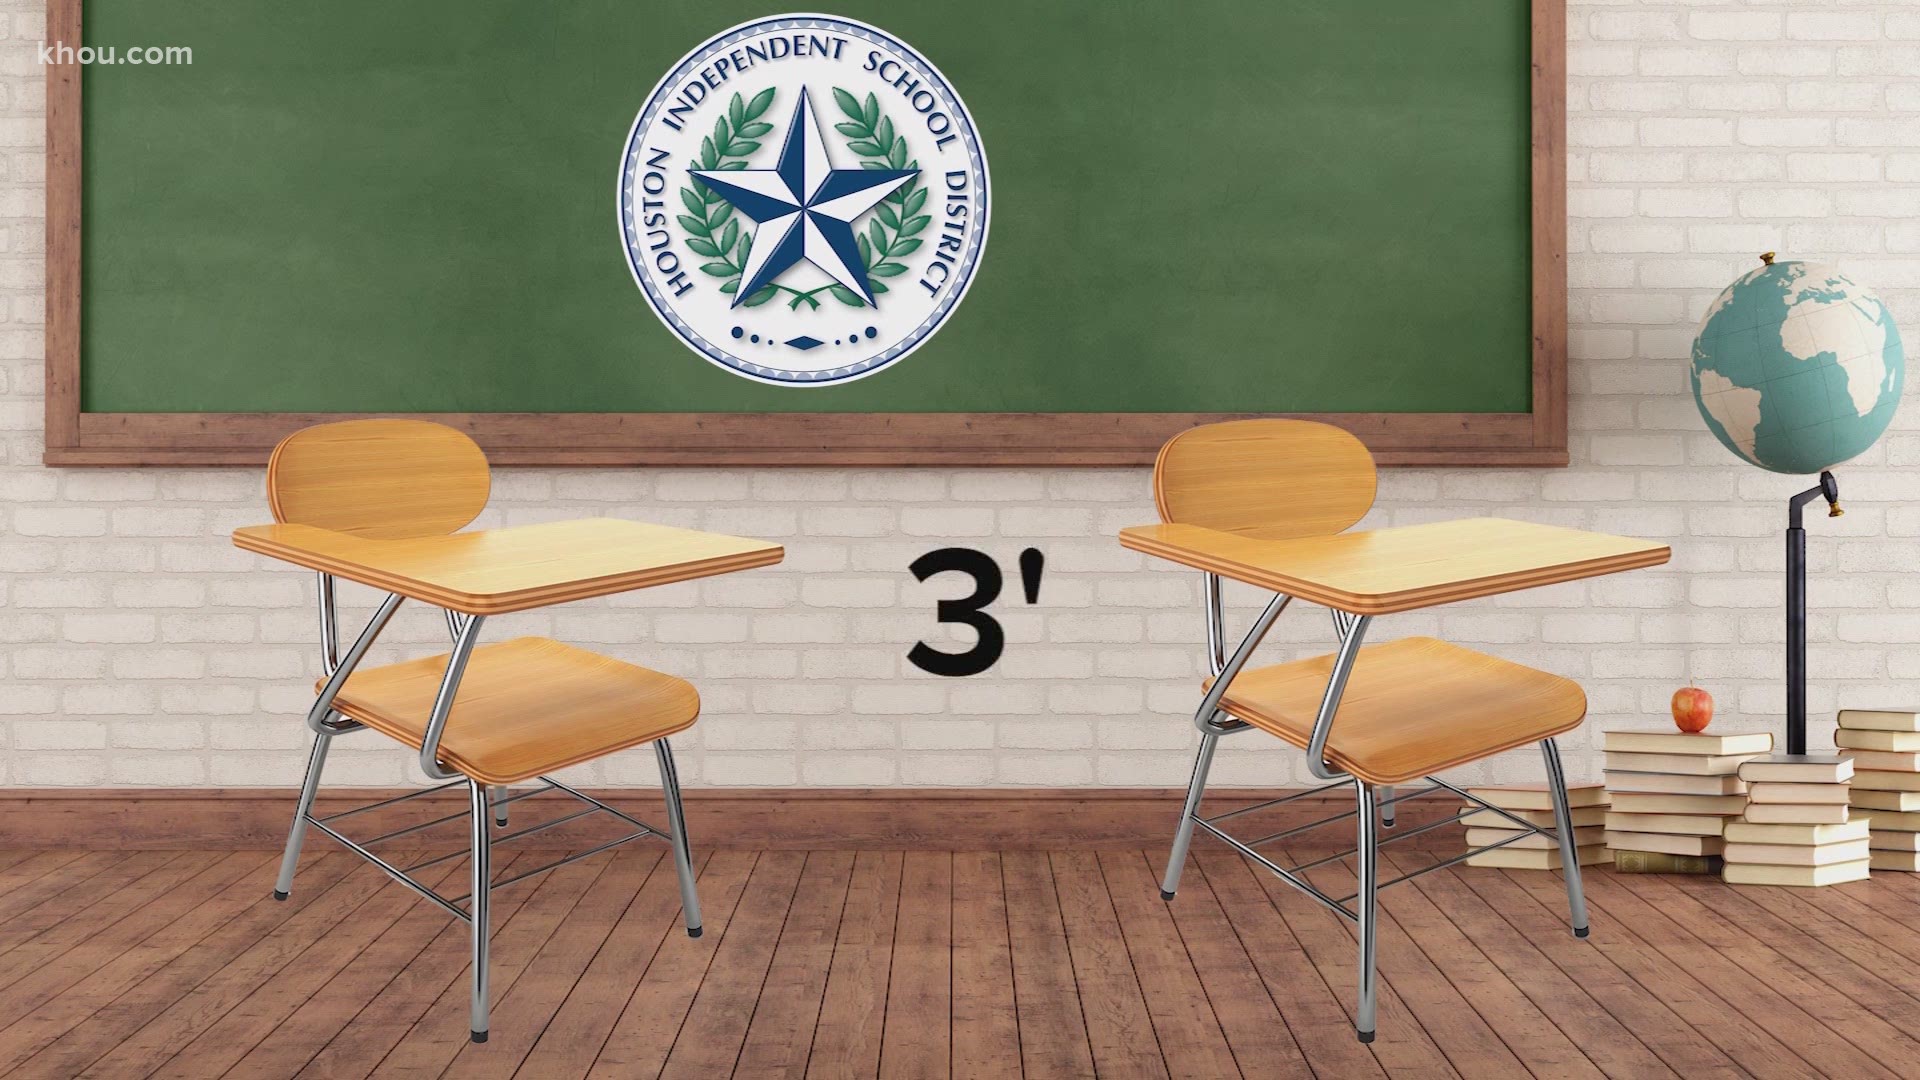 HISD's plan currently requires 6 feet of space, but the district is considering as little as 3 feet in accordance with updated public health guidelines.